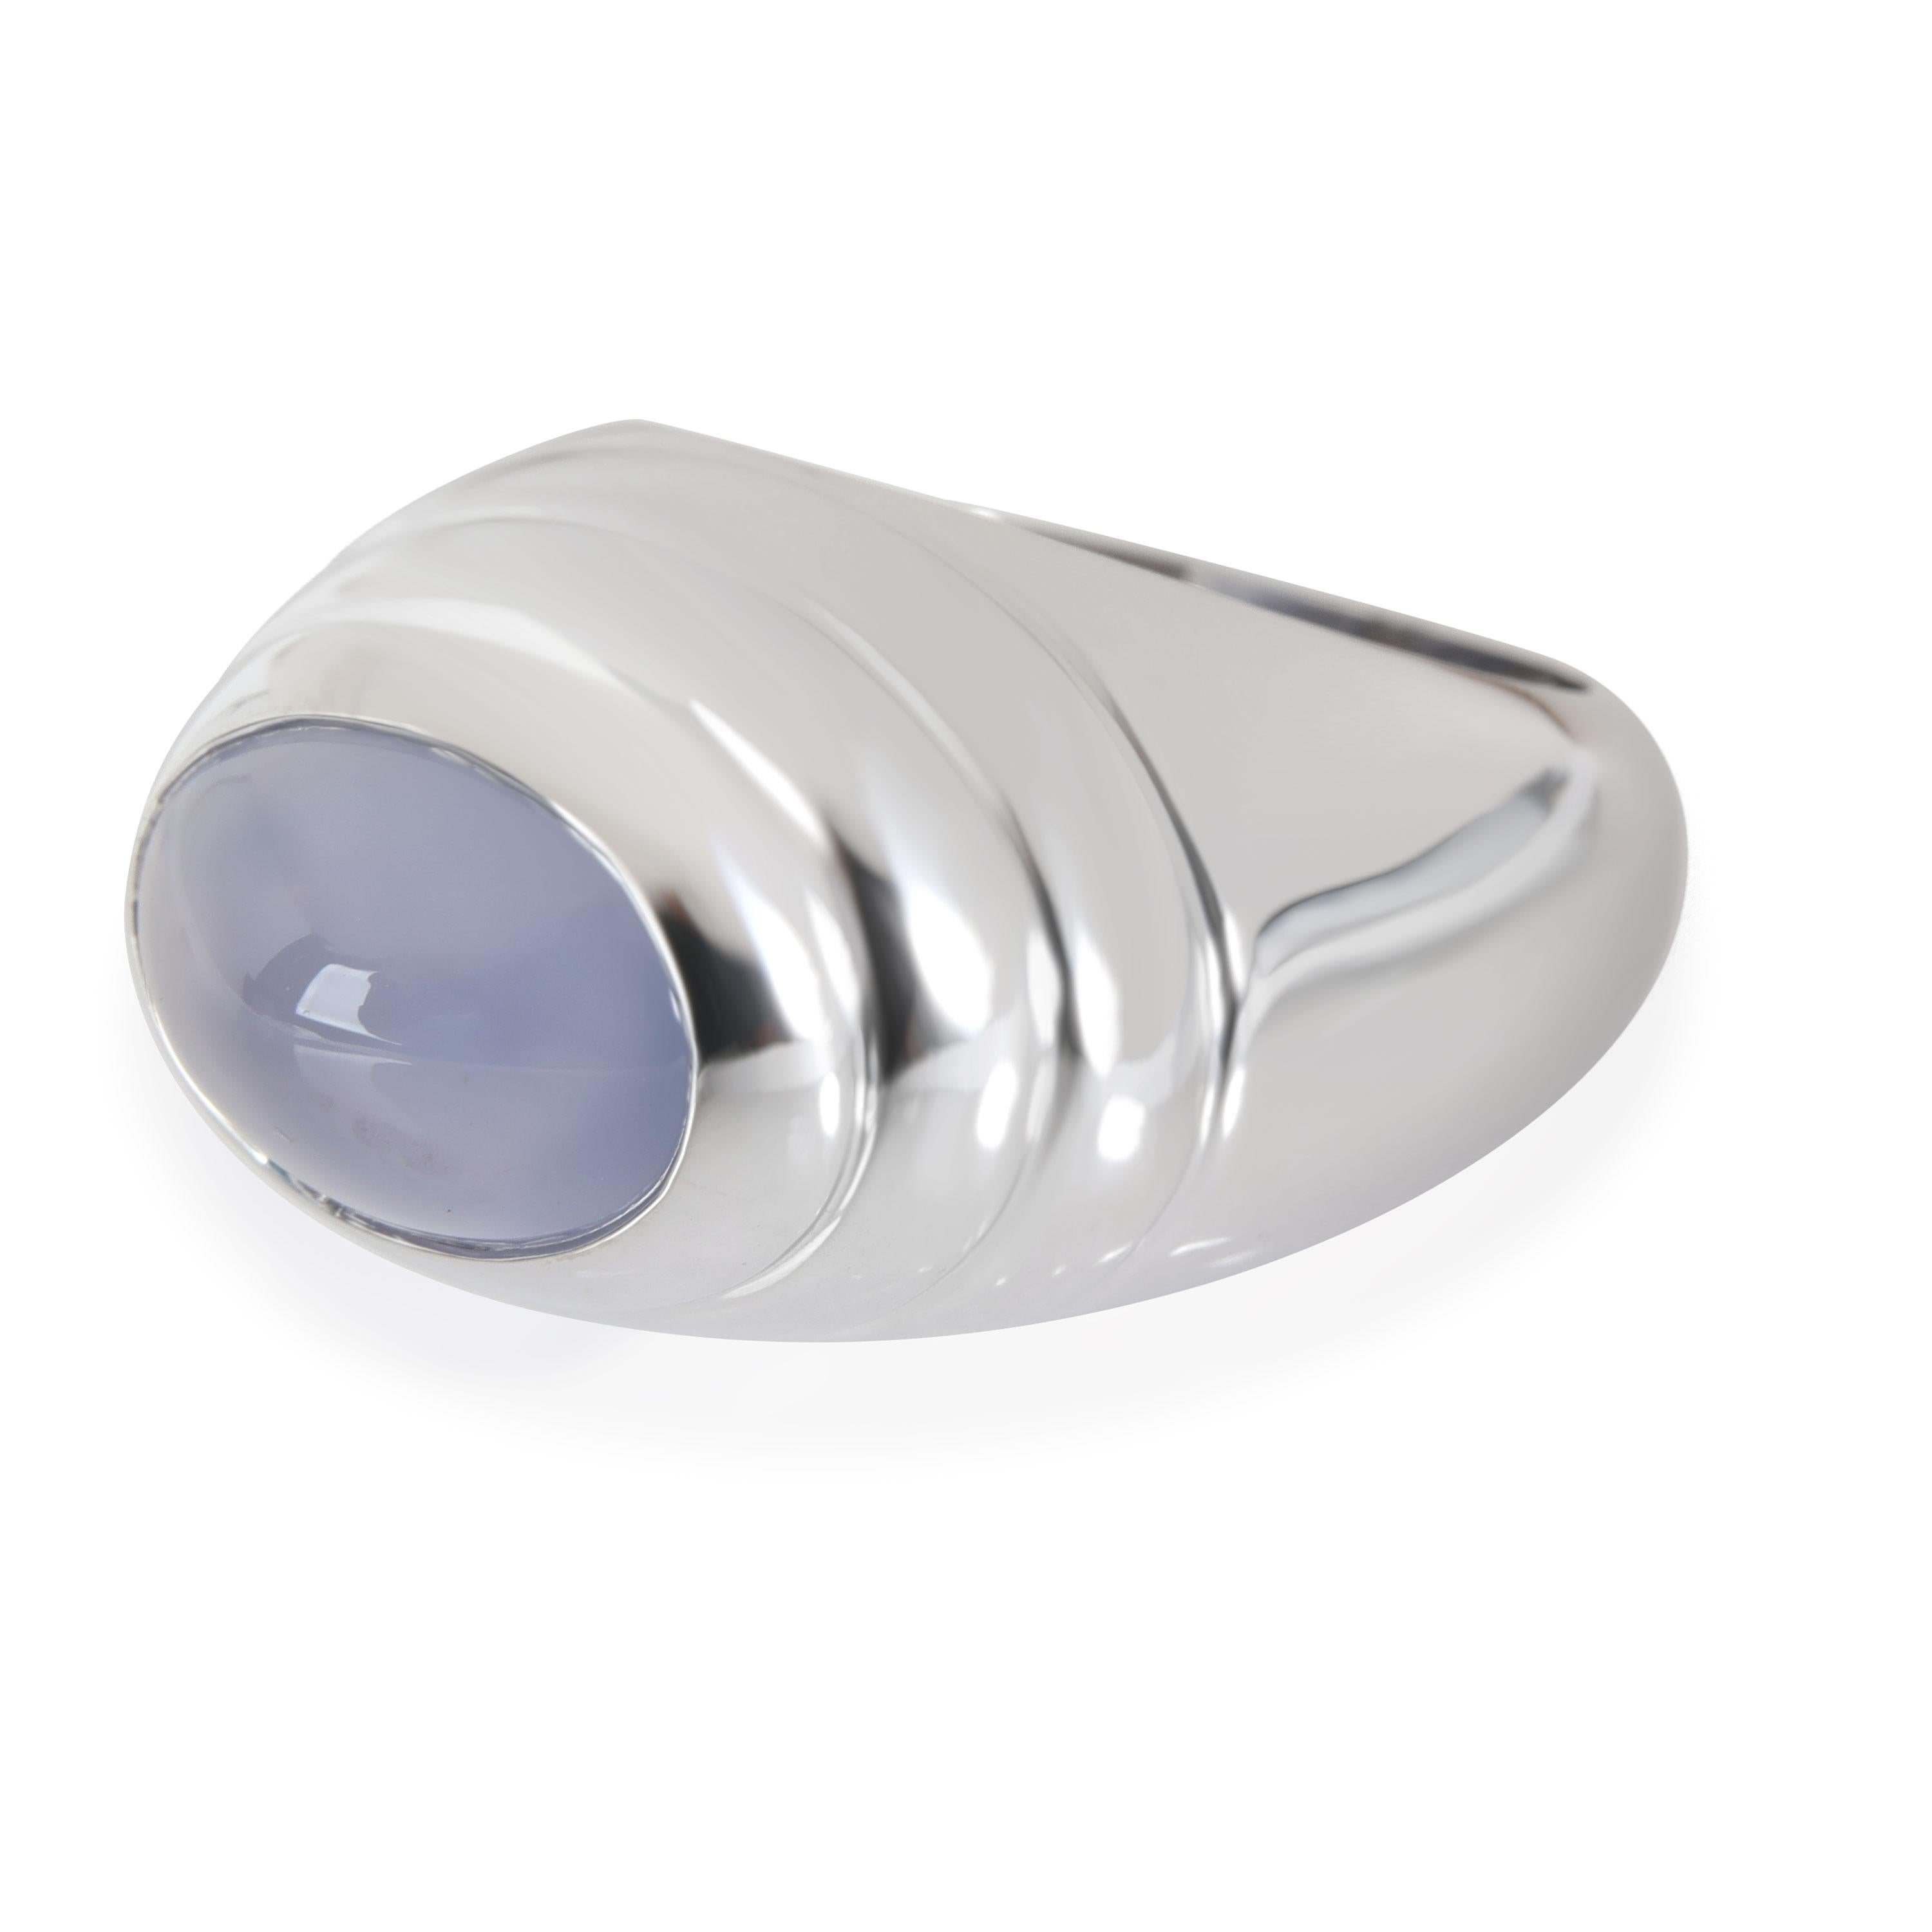 Boucheron Jaipur Chalcedony Fashion Ring in 18k White Gold

PRIMARY DETAILS
SKU: 114720
Listing Title: Boucheron Jaipur Chalcedony Fashion Ring in 18k White Gold
Condition Description: Retails for 3000 USD. In excellent condition and recently